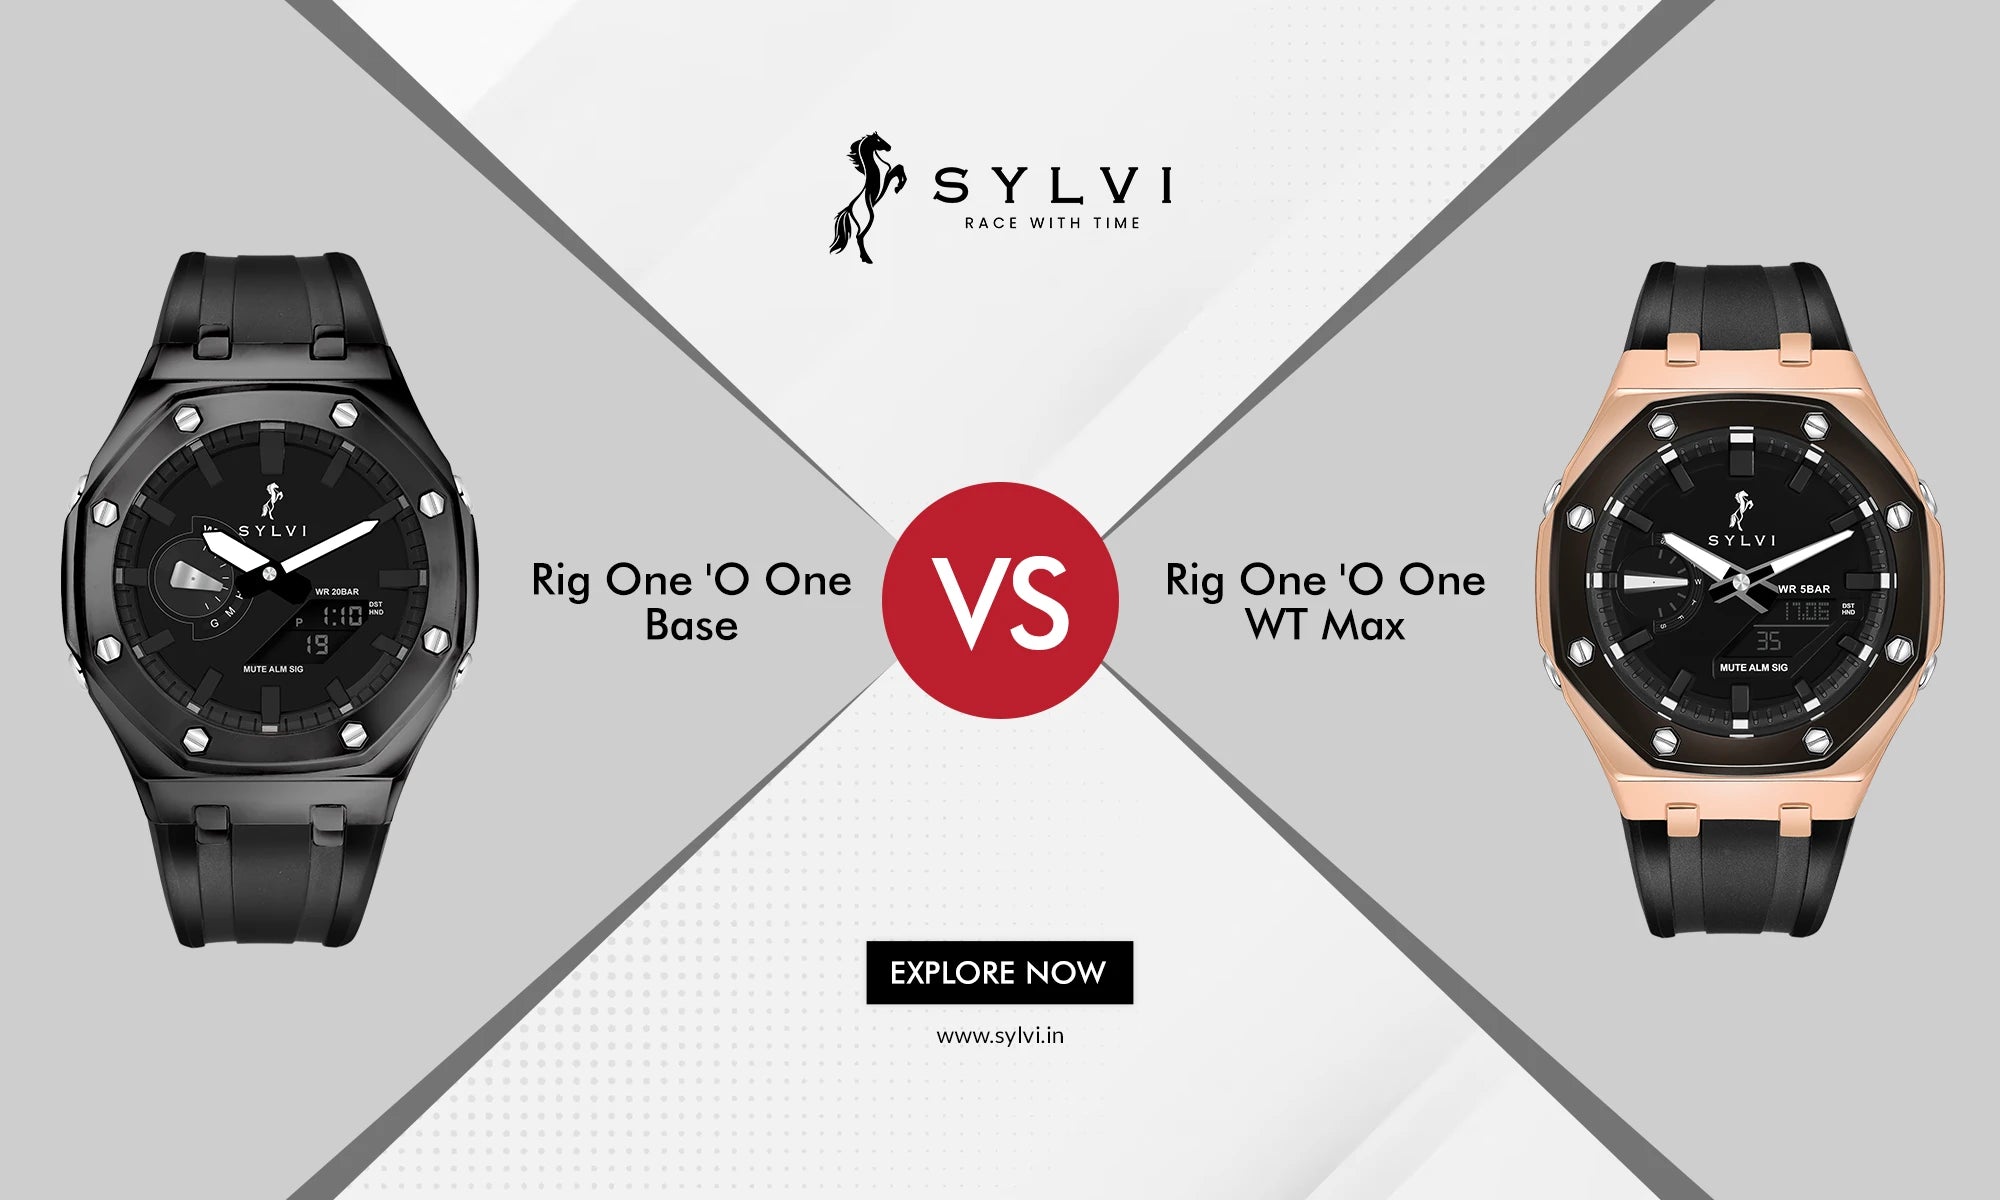 Key Differences Between Sylvi Rig One 'O One Base and WT Max Version